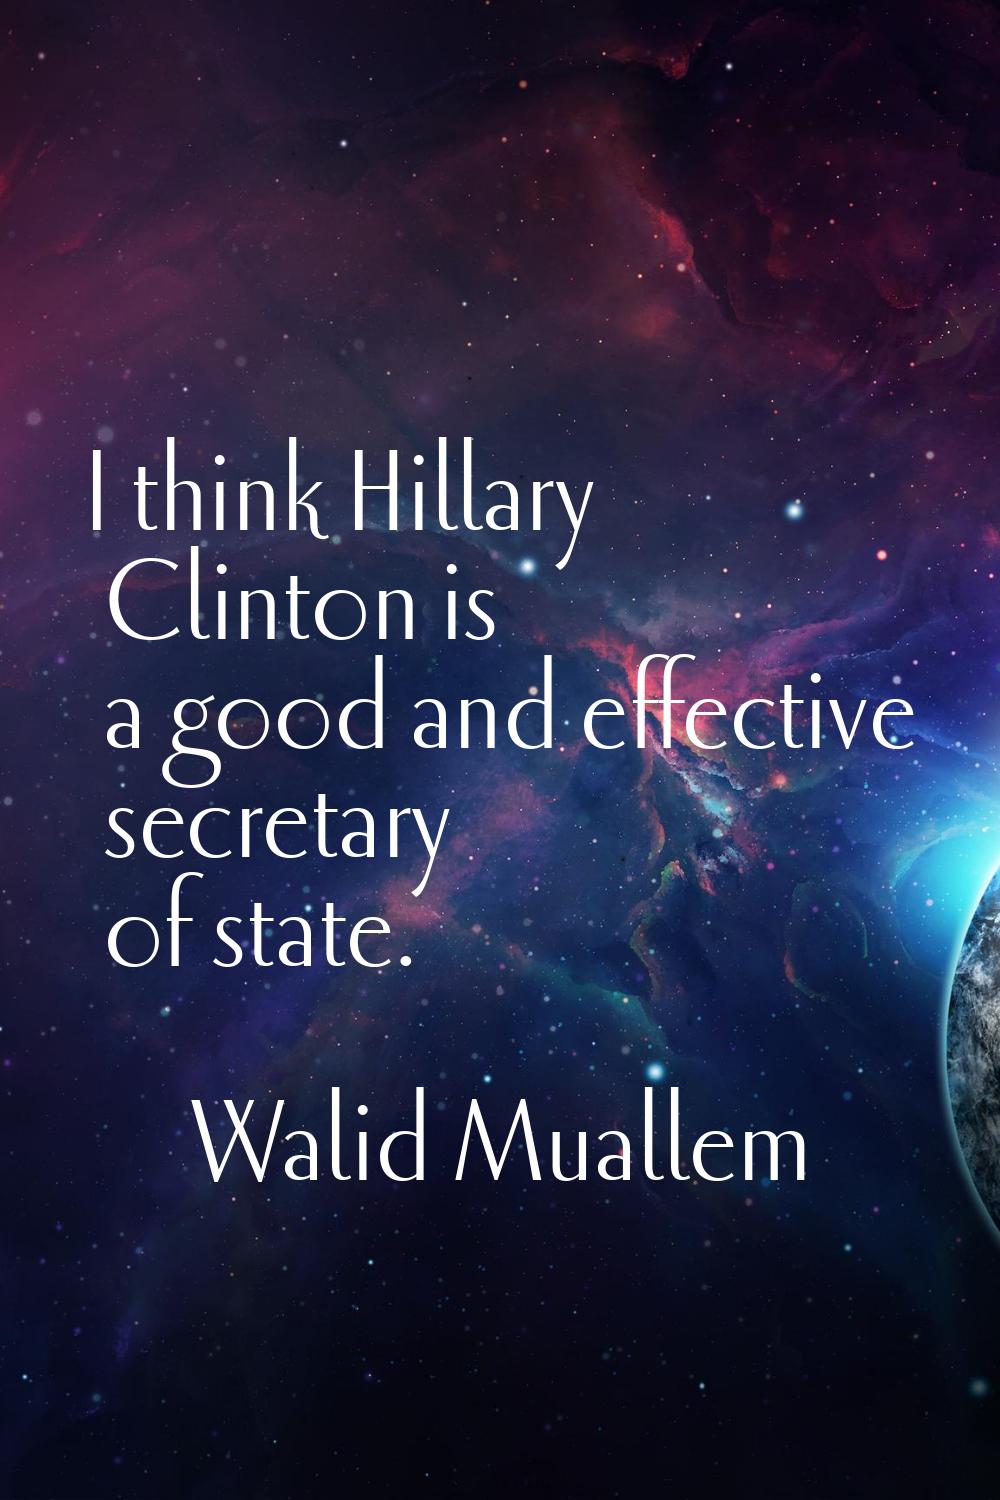 I think Hillary Clinton is a good and effective secretary of state.